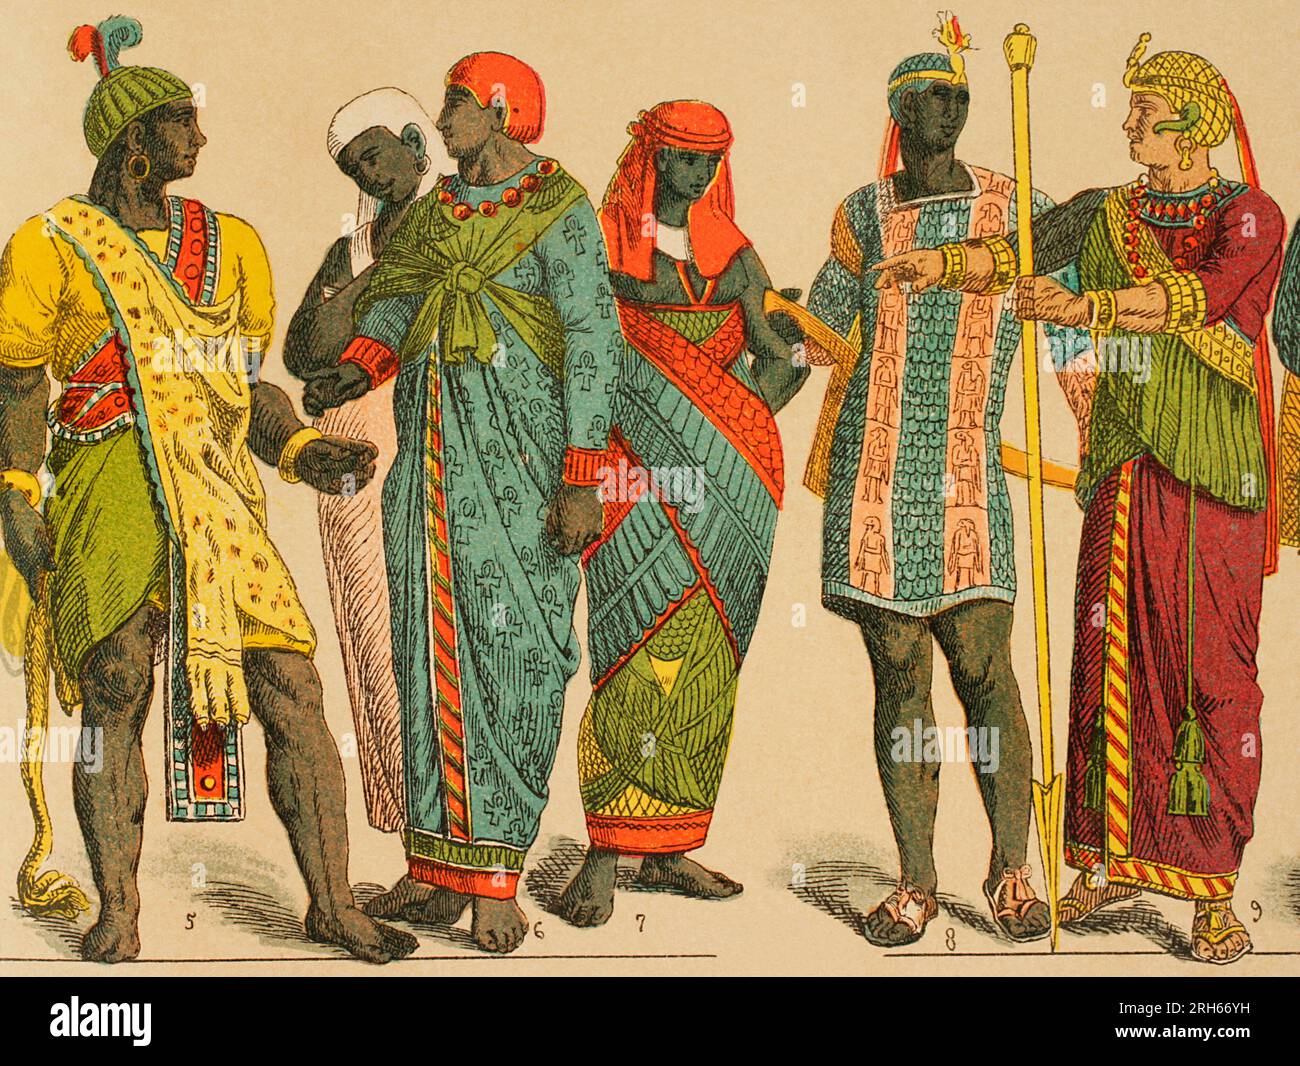 Ancient Egypt. From left to right; 5: animal skin used as a cape, 6: costume adhered to the body with long narrow sleeves, 7: priestess in ceremonial costume, 8: breastplate or chain-mail of scales, 9: costume adhered to the body with long narrow sleeves. Chromolithography. 'Historia Universal' (Universal History), by Cesar Cantu. Volume I, 1881. Stock Photo